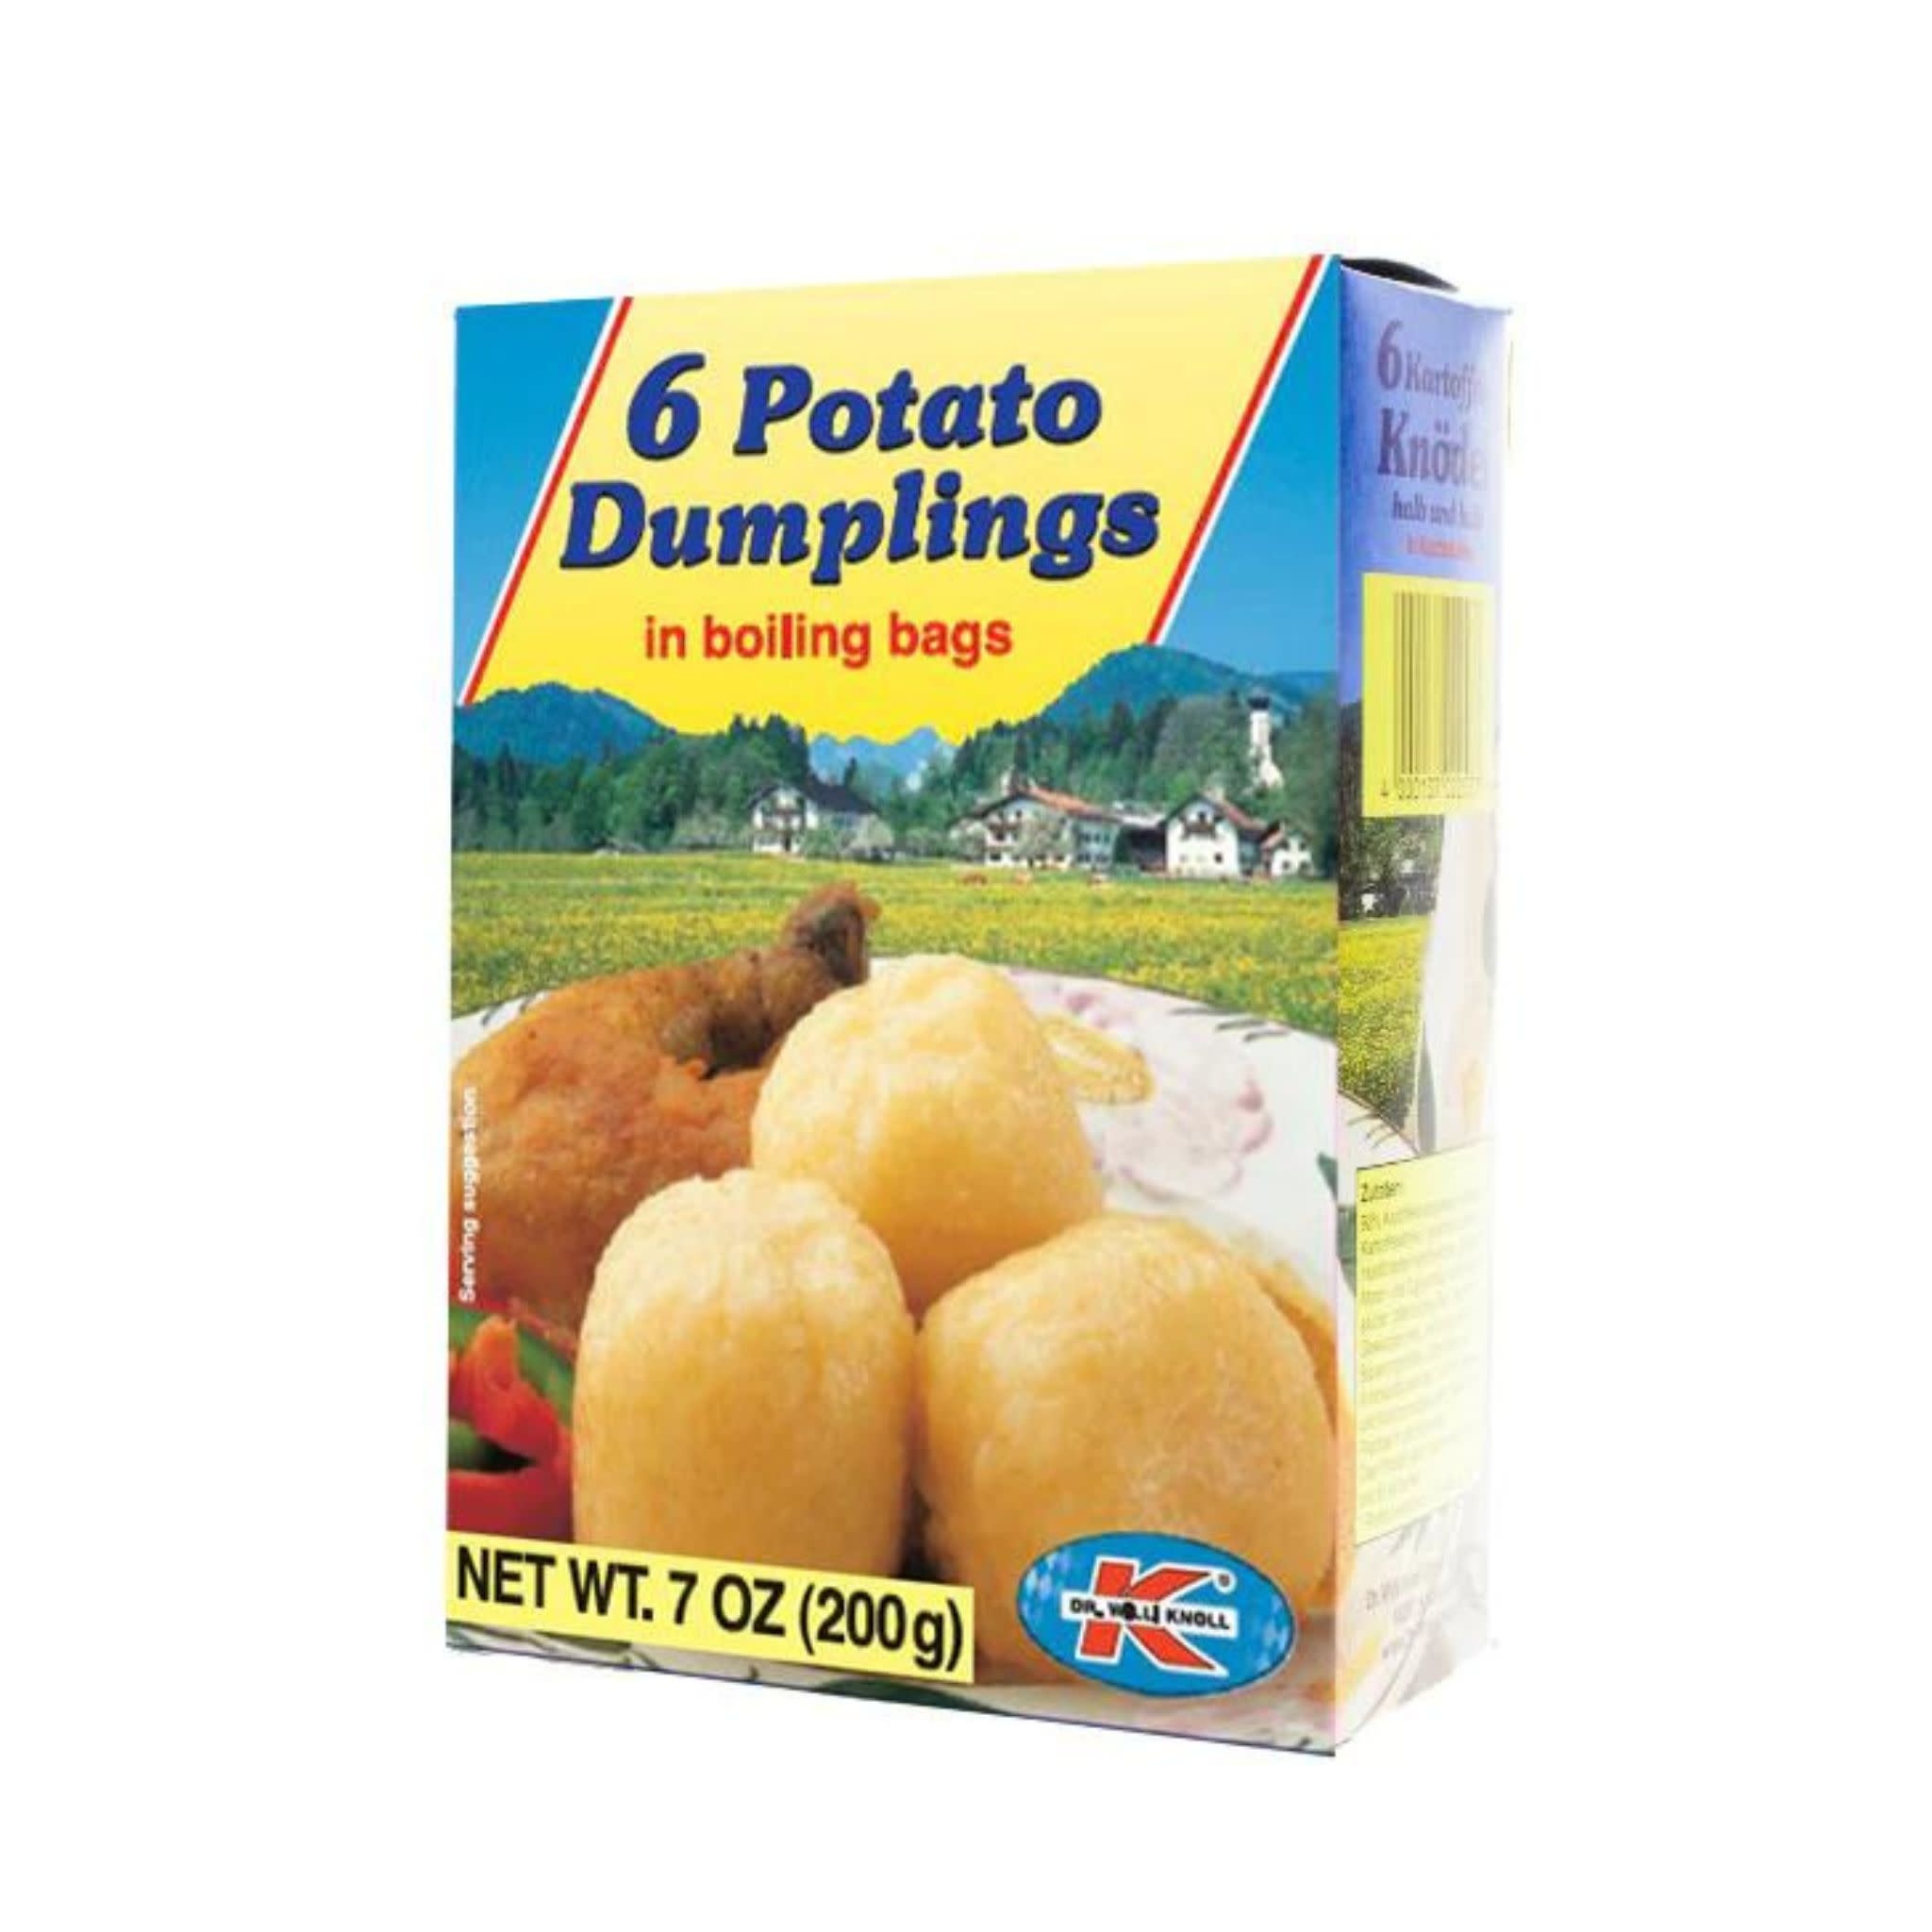  Dr. Willi Knoll 12 Halb And Halb Knoedel German Dumpling Mix,  10 ounce (Pack of 3) with Bamboo Serving Tong- Easy to Prepare and  Delicious Potato Dumpling Mix : Grocery & Gourmet Food